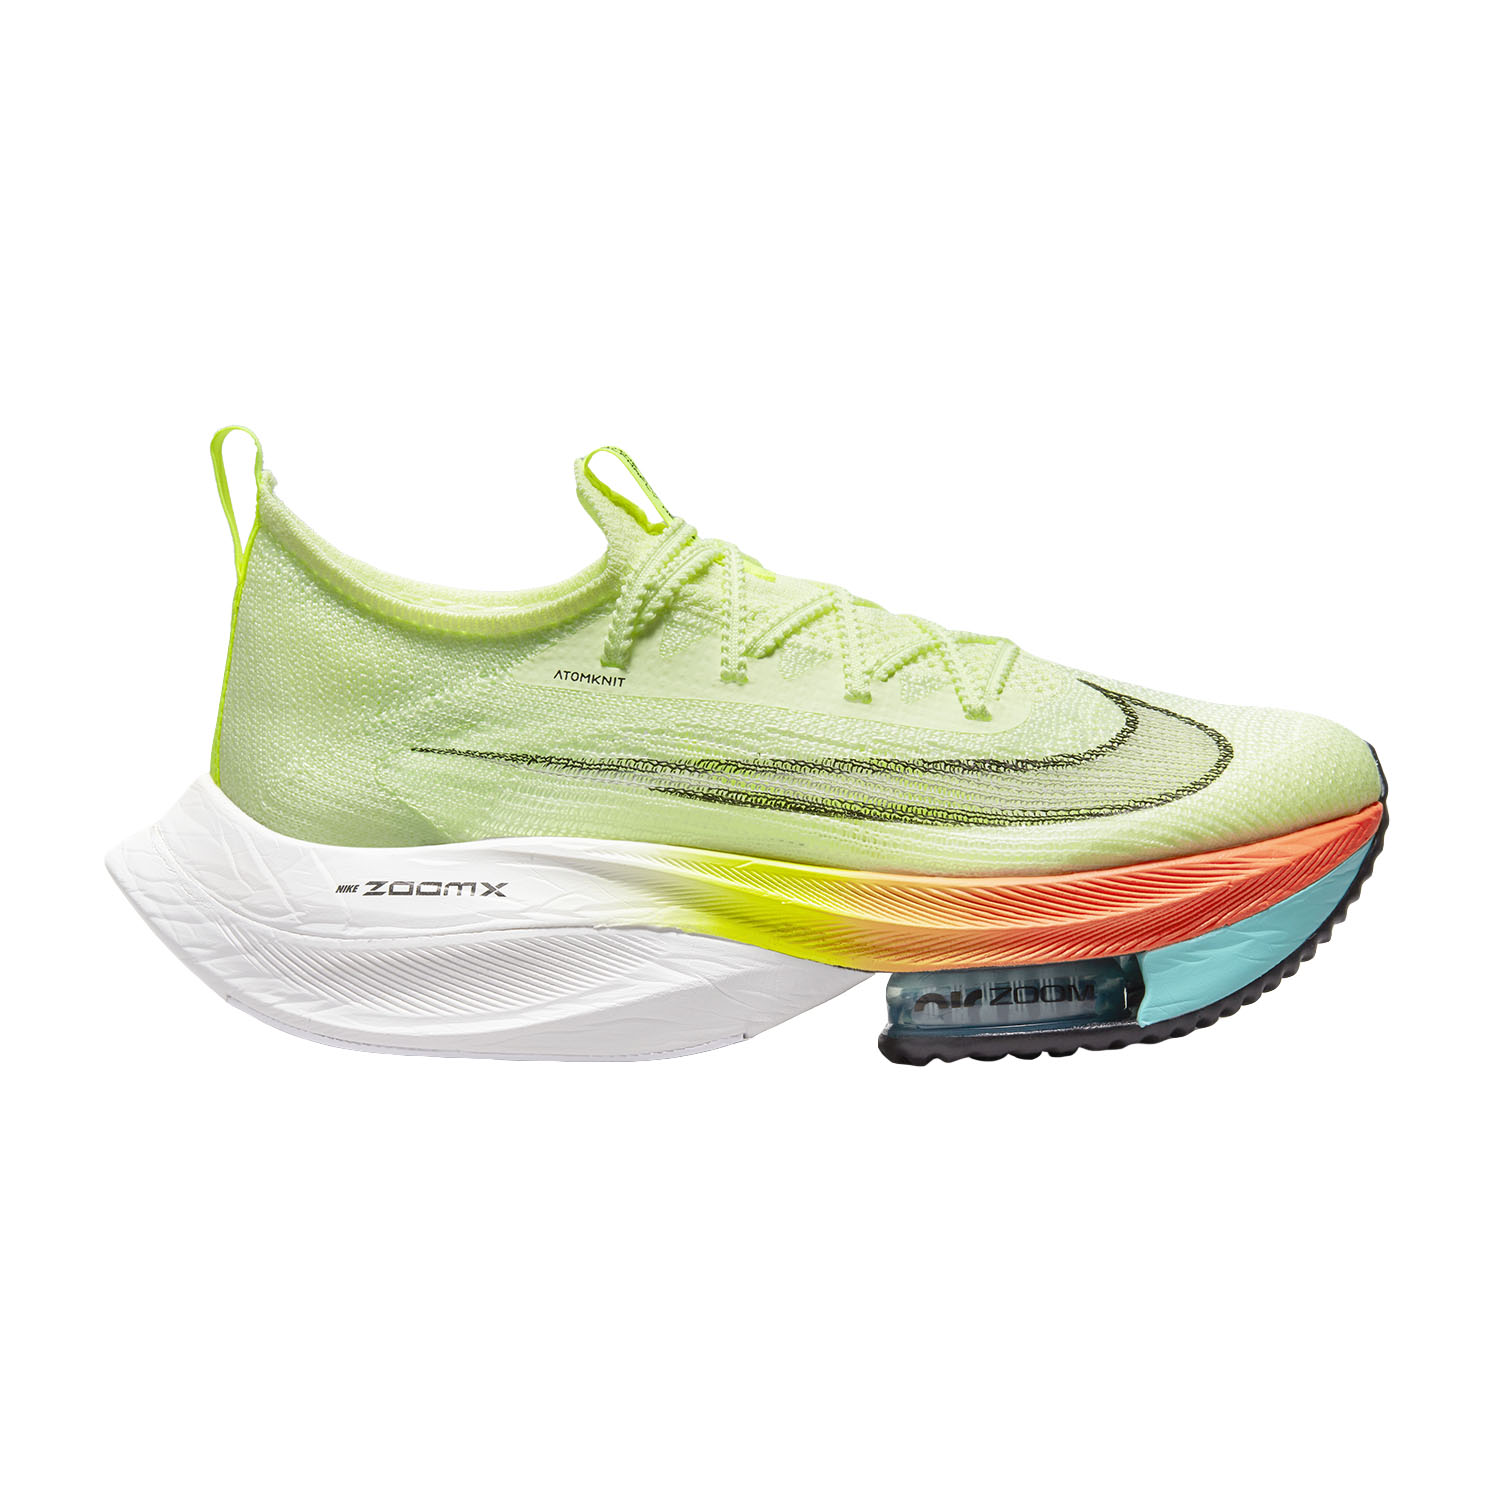 Nike Zoom Alphafly Next% Women's Running Shoes - Barely Volt